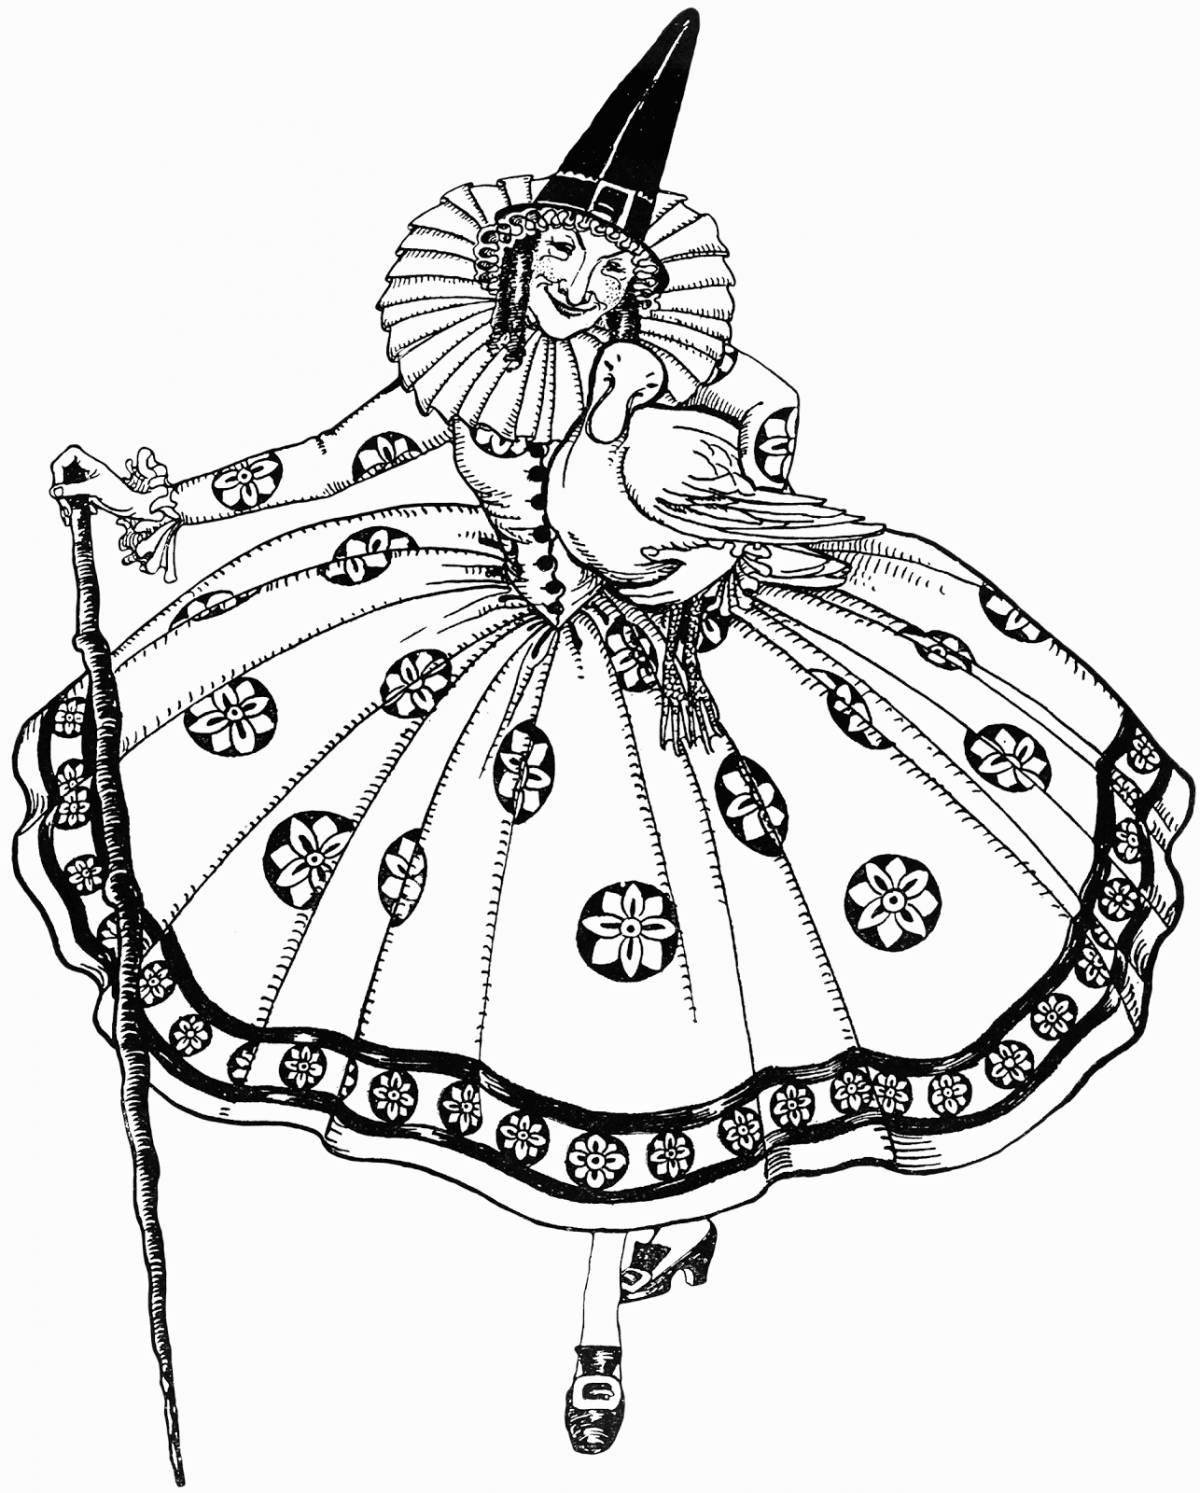 Coloring page luxury theatrical costume